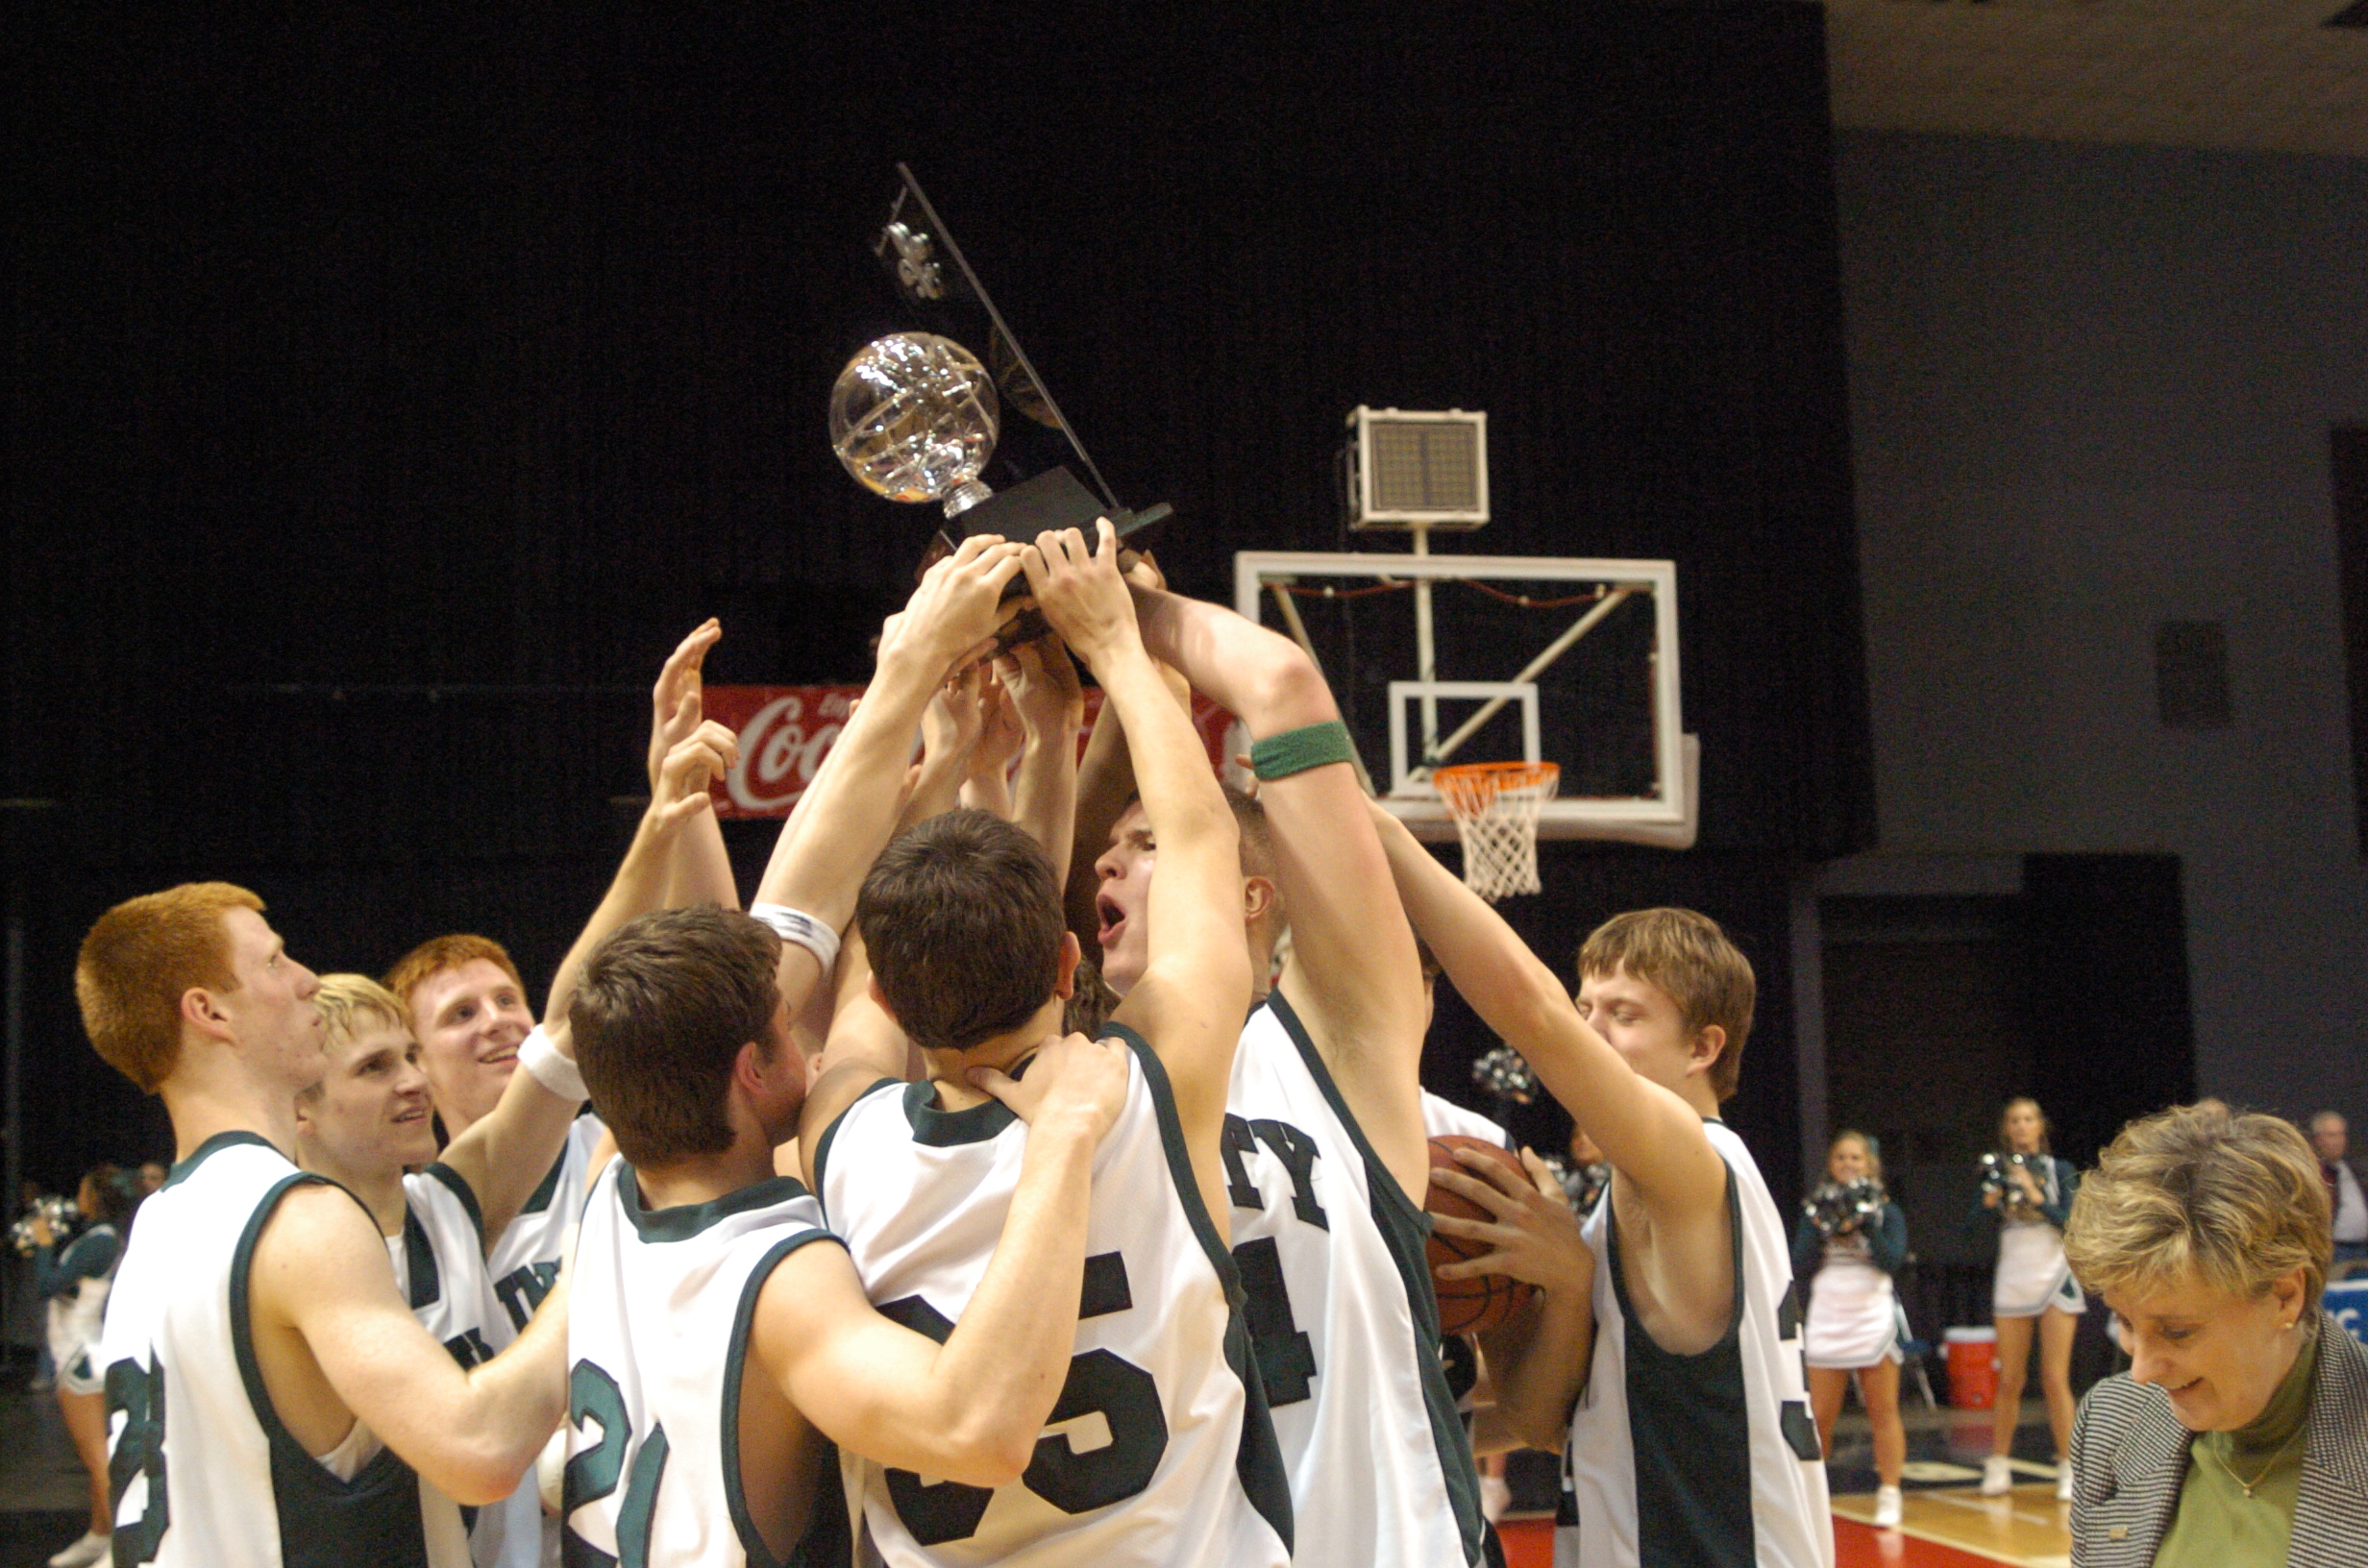 basketball team holding the trophy